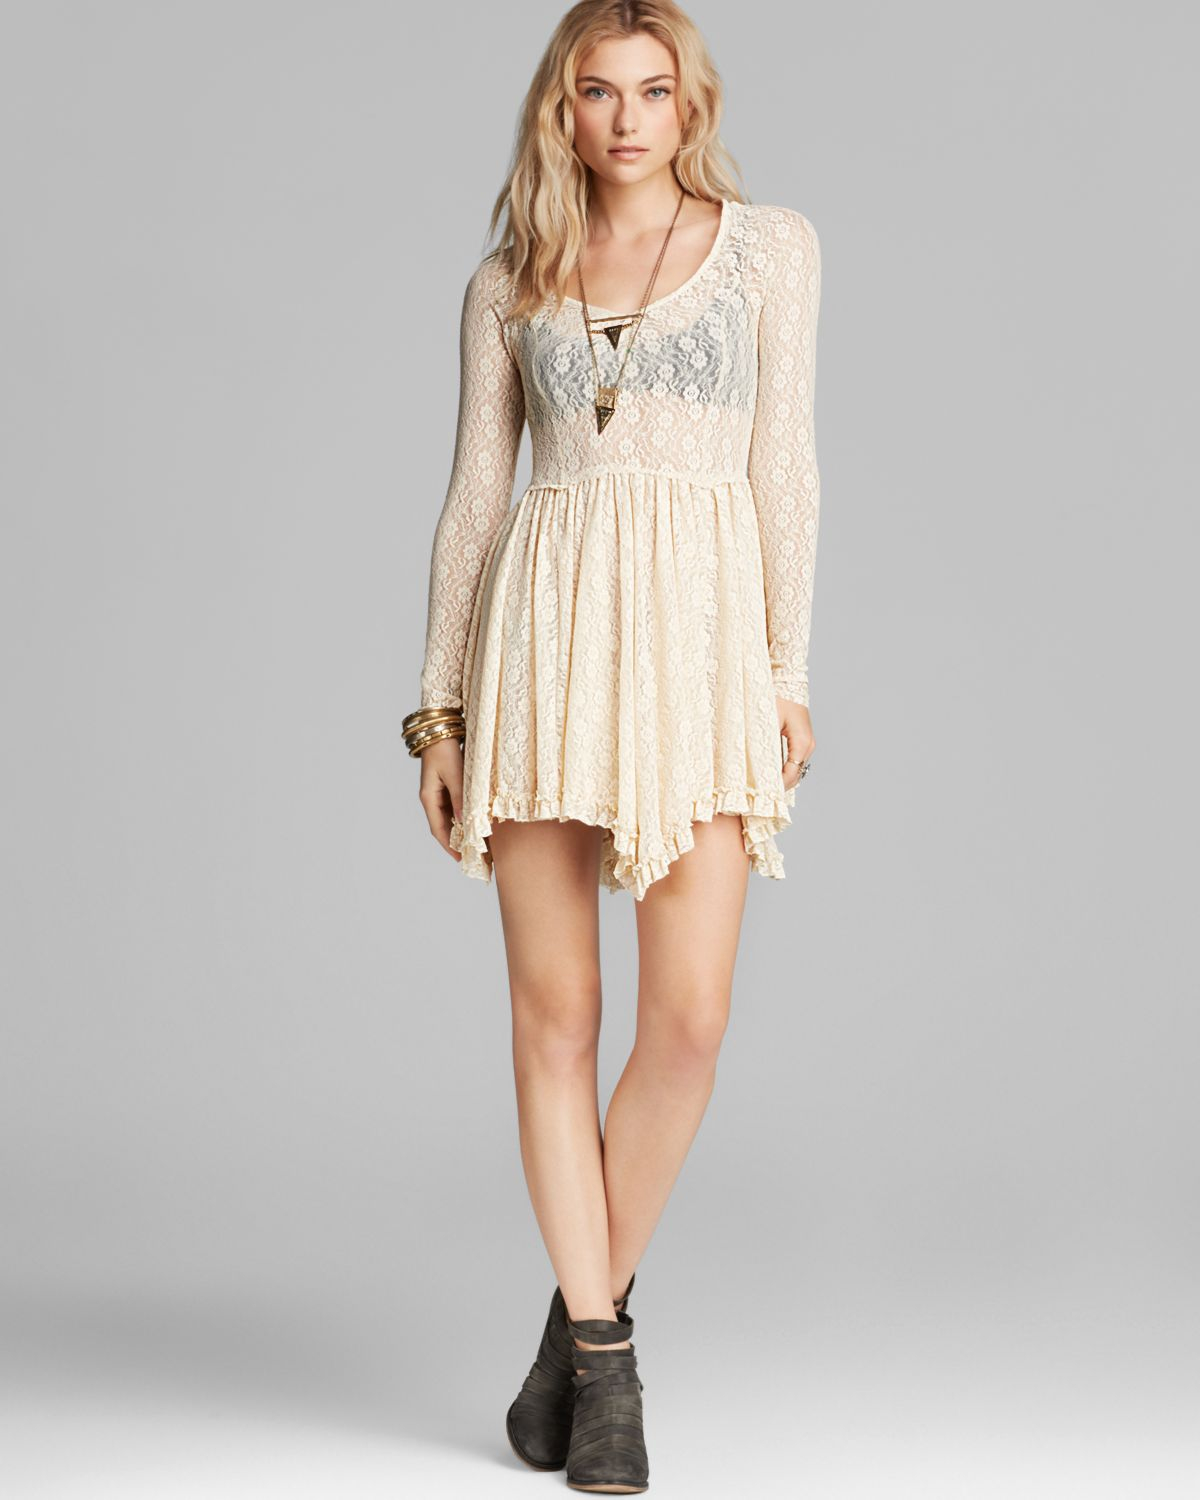 Lyst - Free People Slip Dress - Star Lace Witchy in Natural